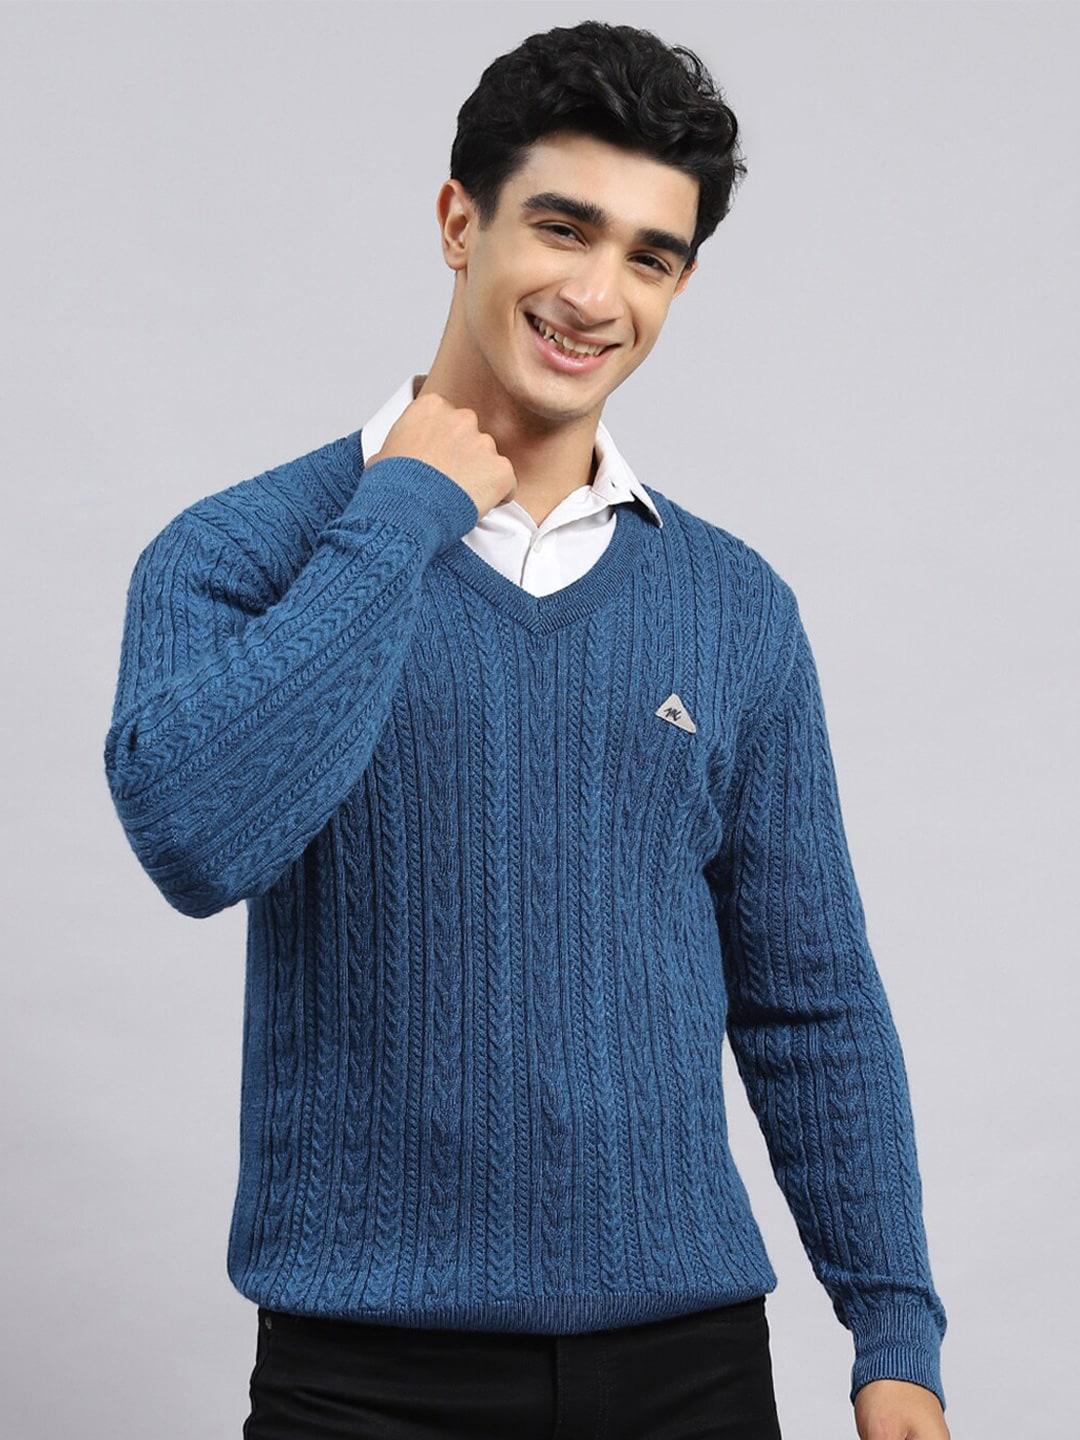 monte-carlo-self-design-cable-knit-v-neck-long-sleeve-pullover-sweaters